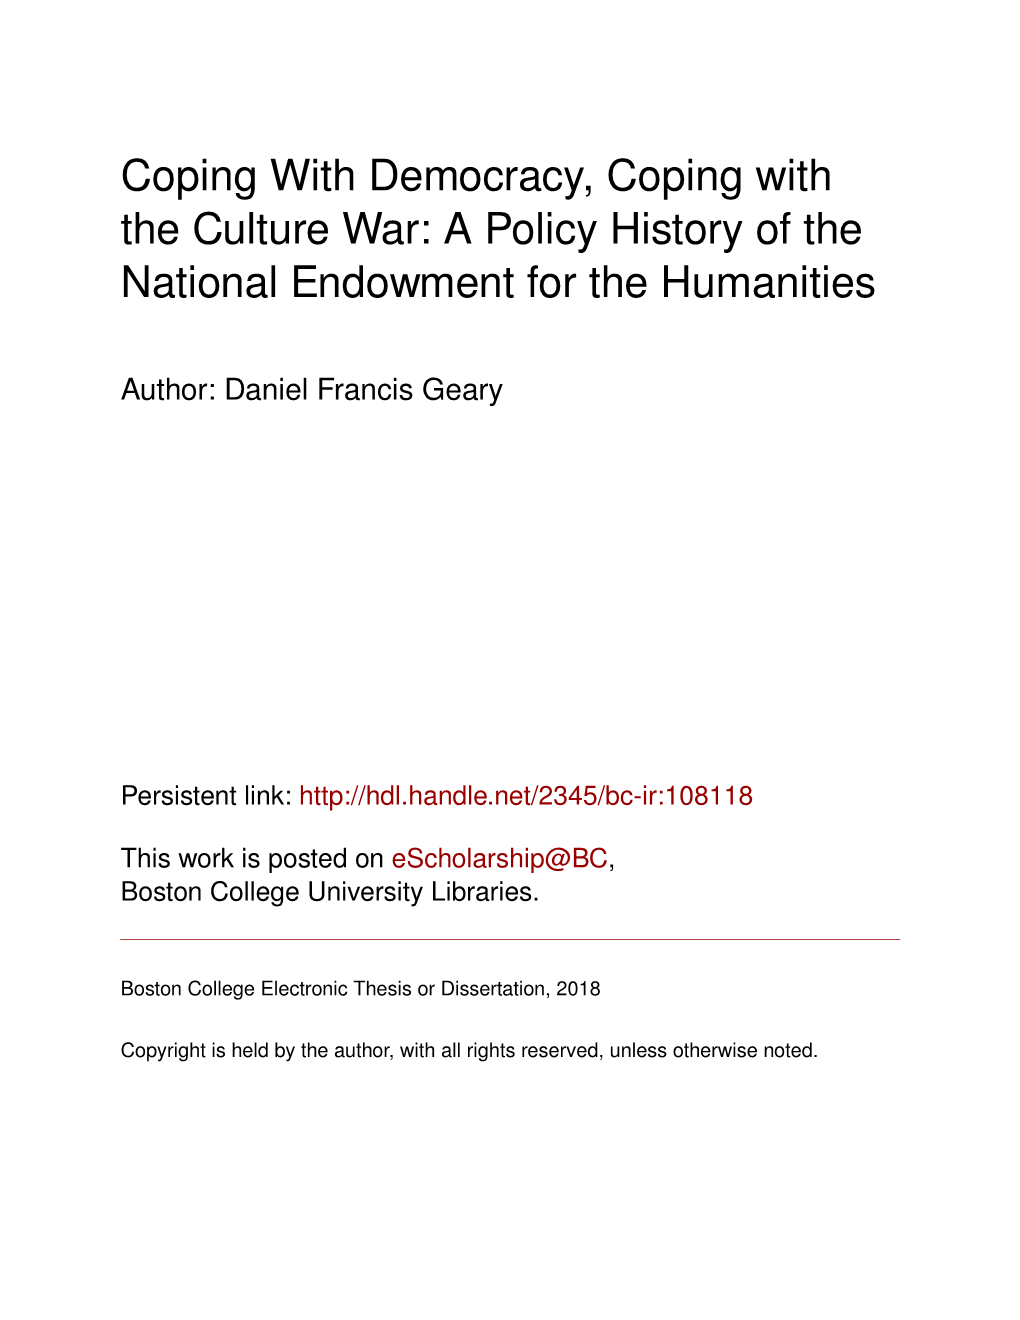 Coping with Democracy, Coping with the Culture War: a Policy History of the National Endowment for the Humanities